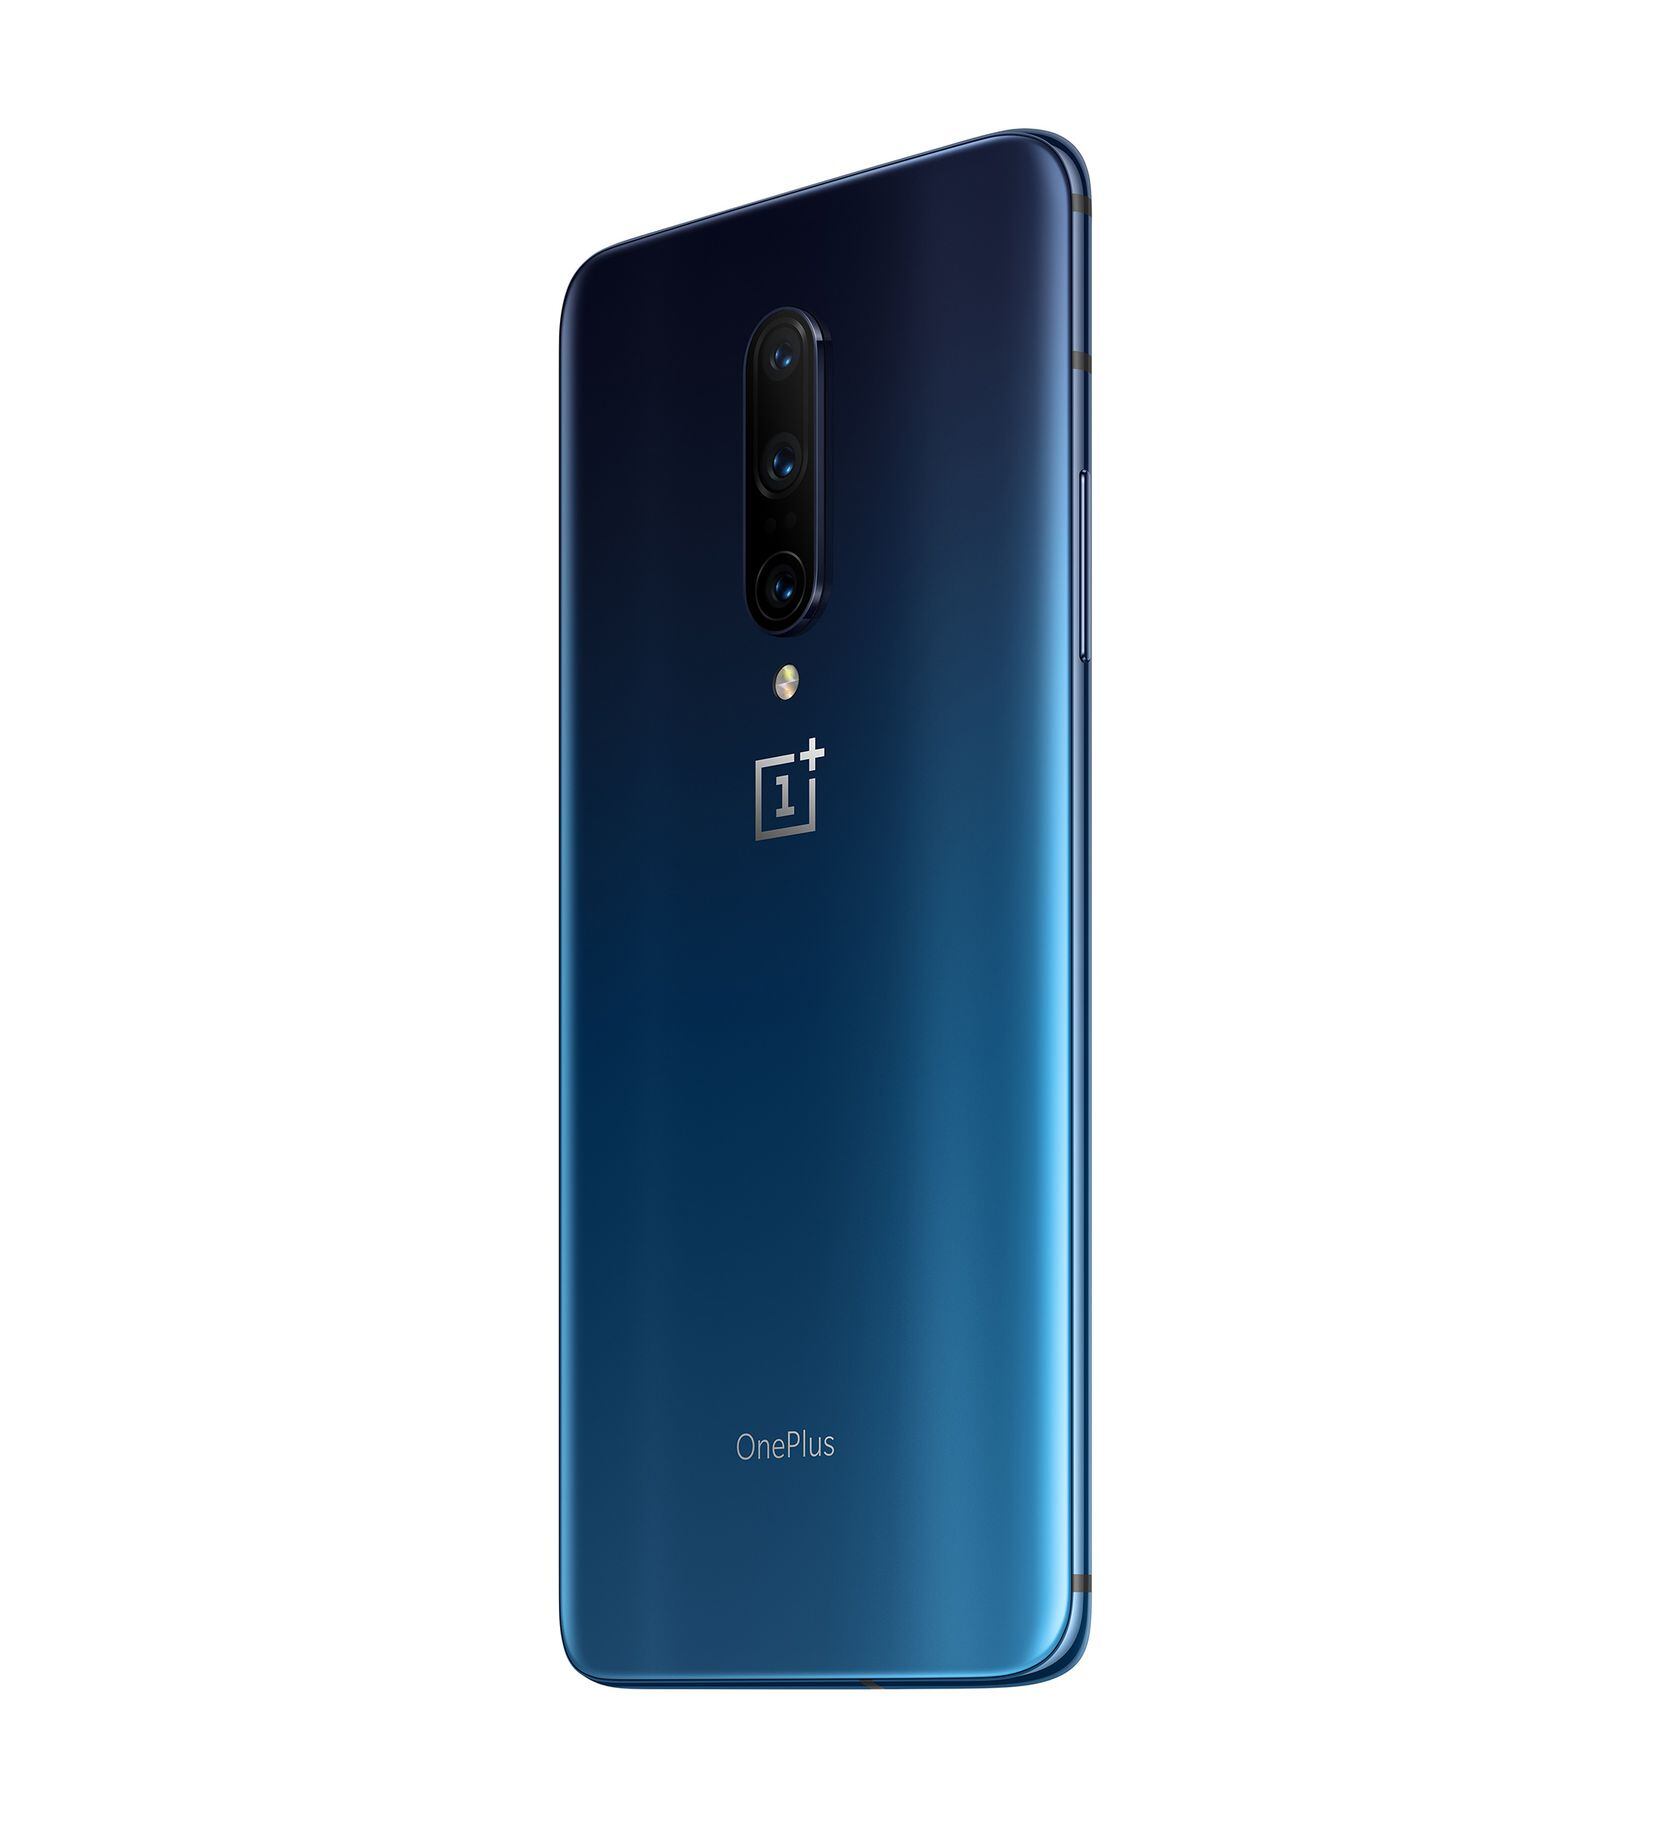 The back of the OnePlus 7 Pro in Nebula Blue, which is a great-looking color.